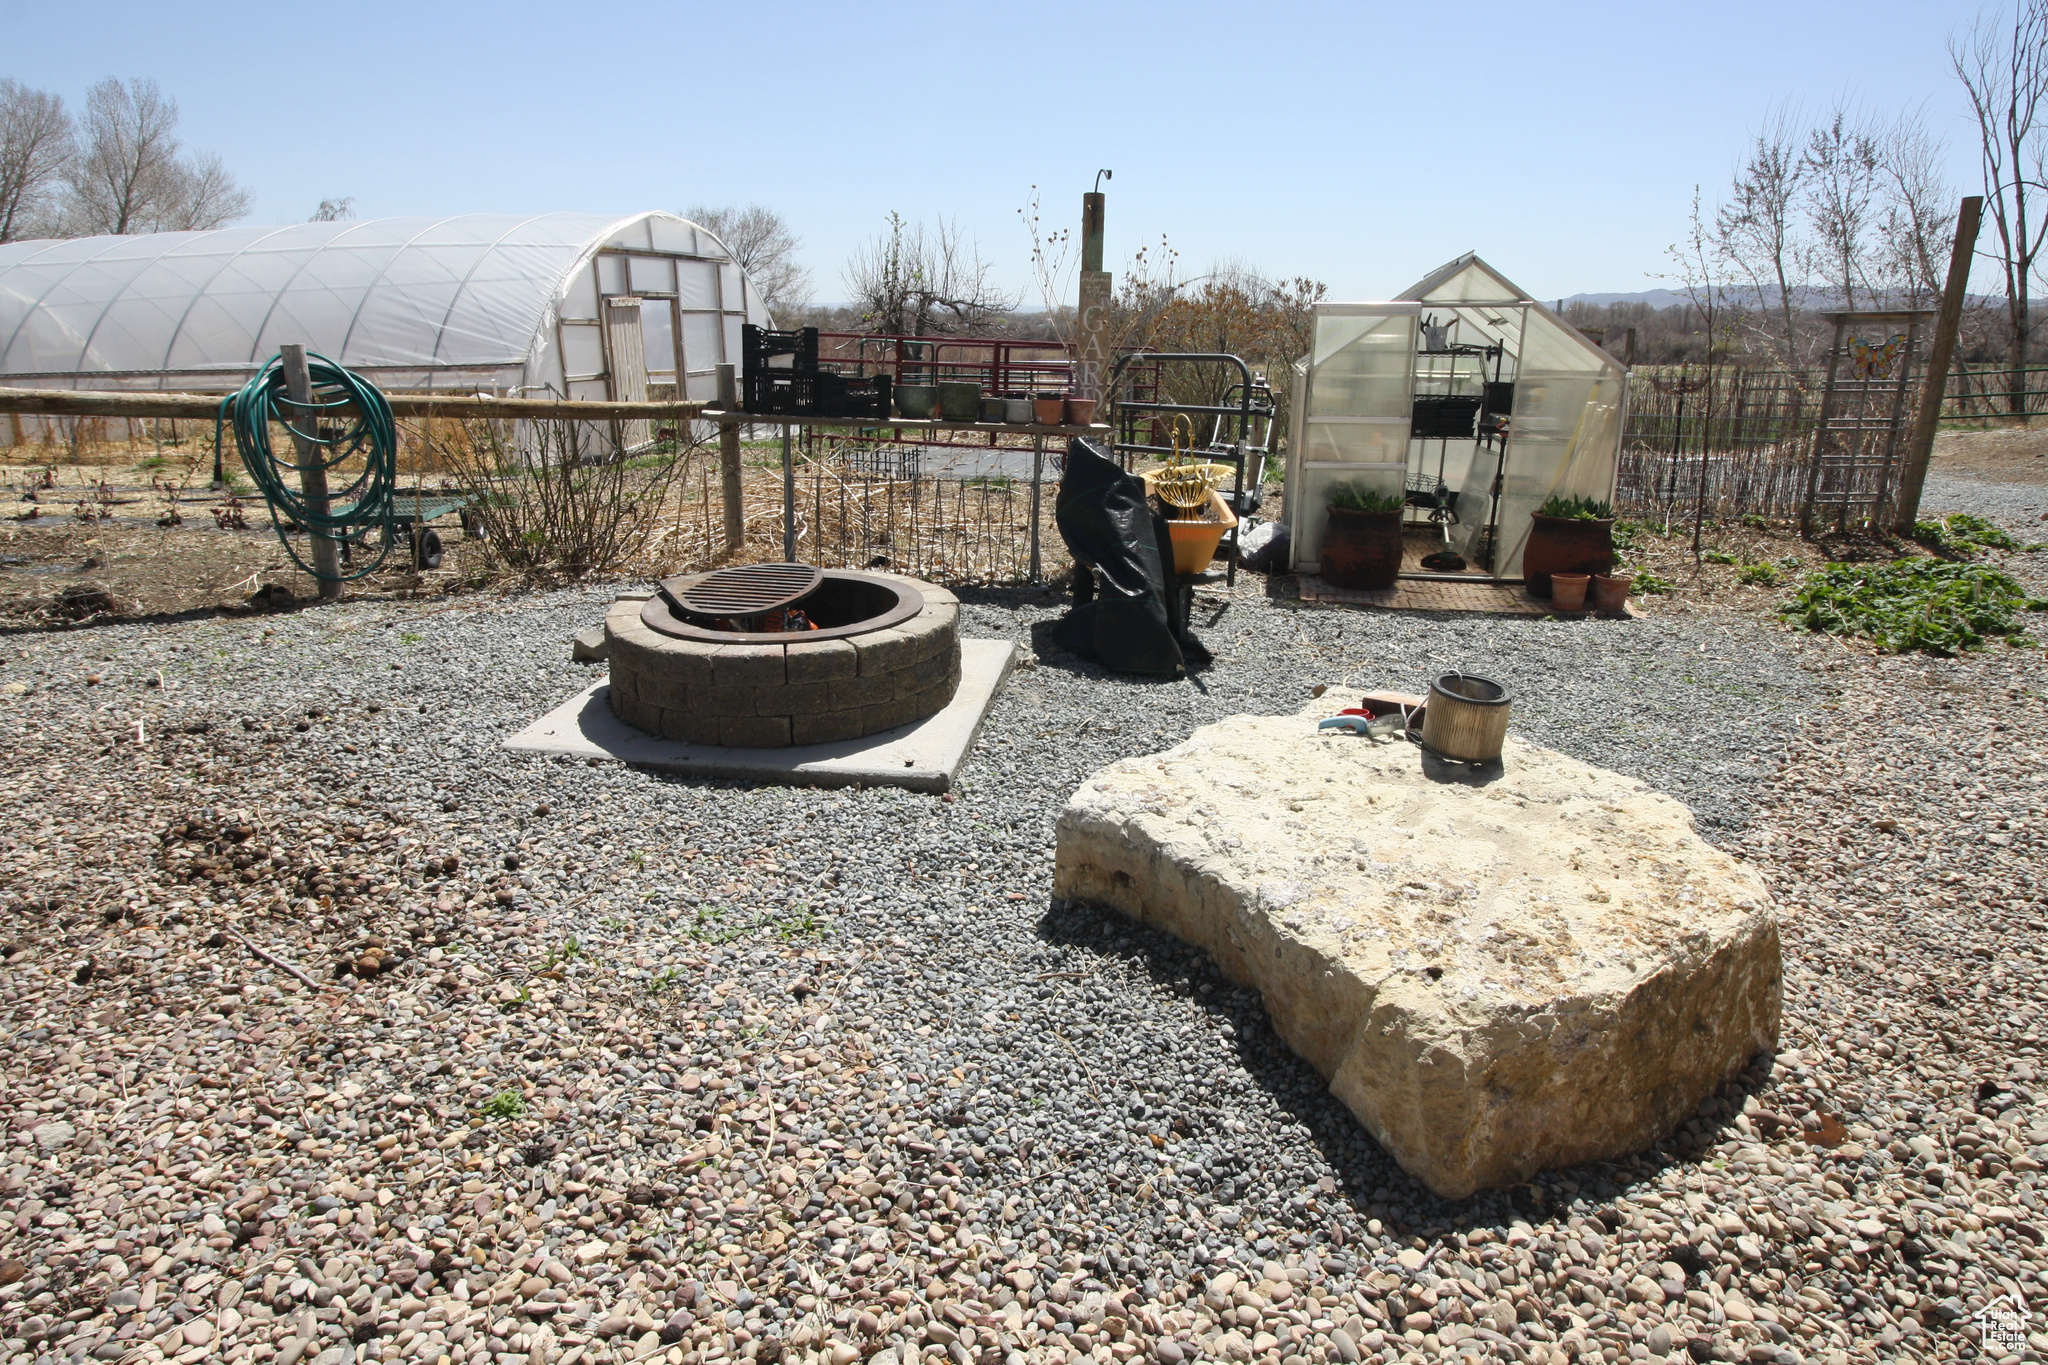 View of yard featuring an outdoor fire pit and an outdoor structure